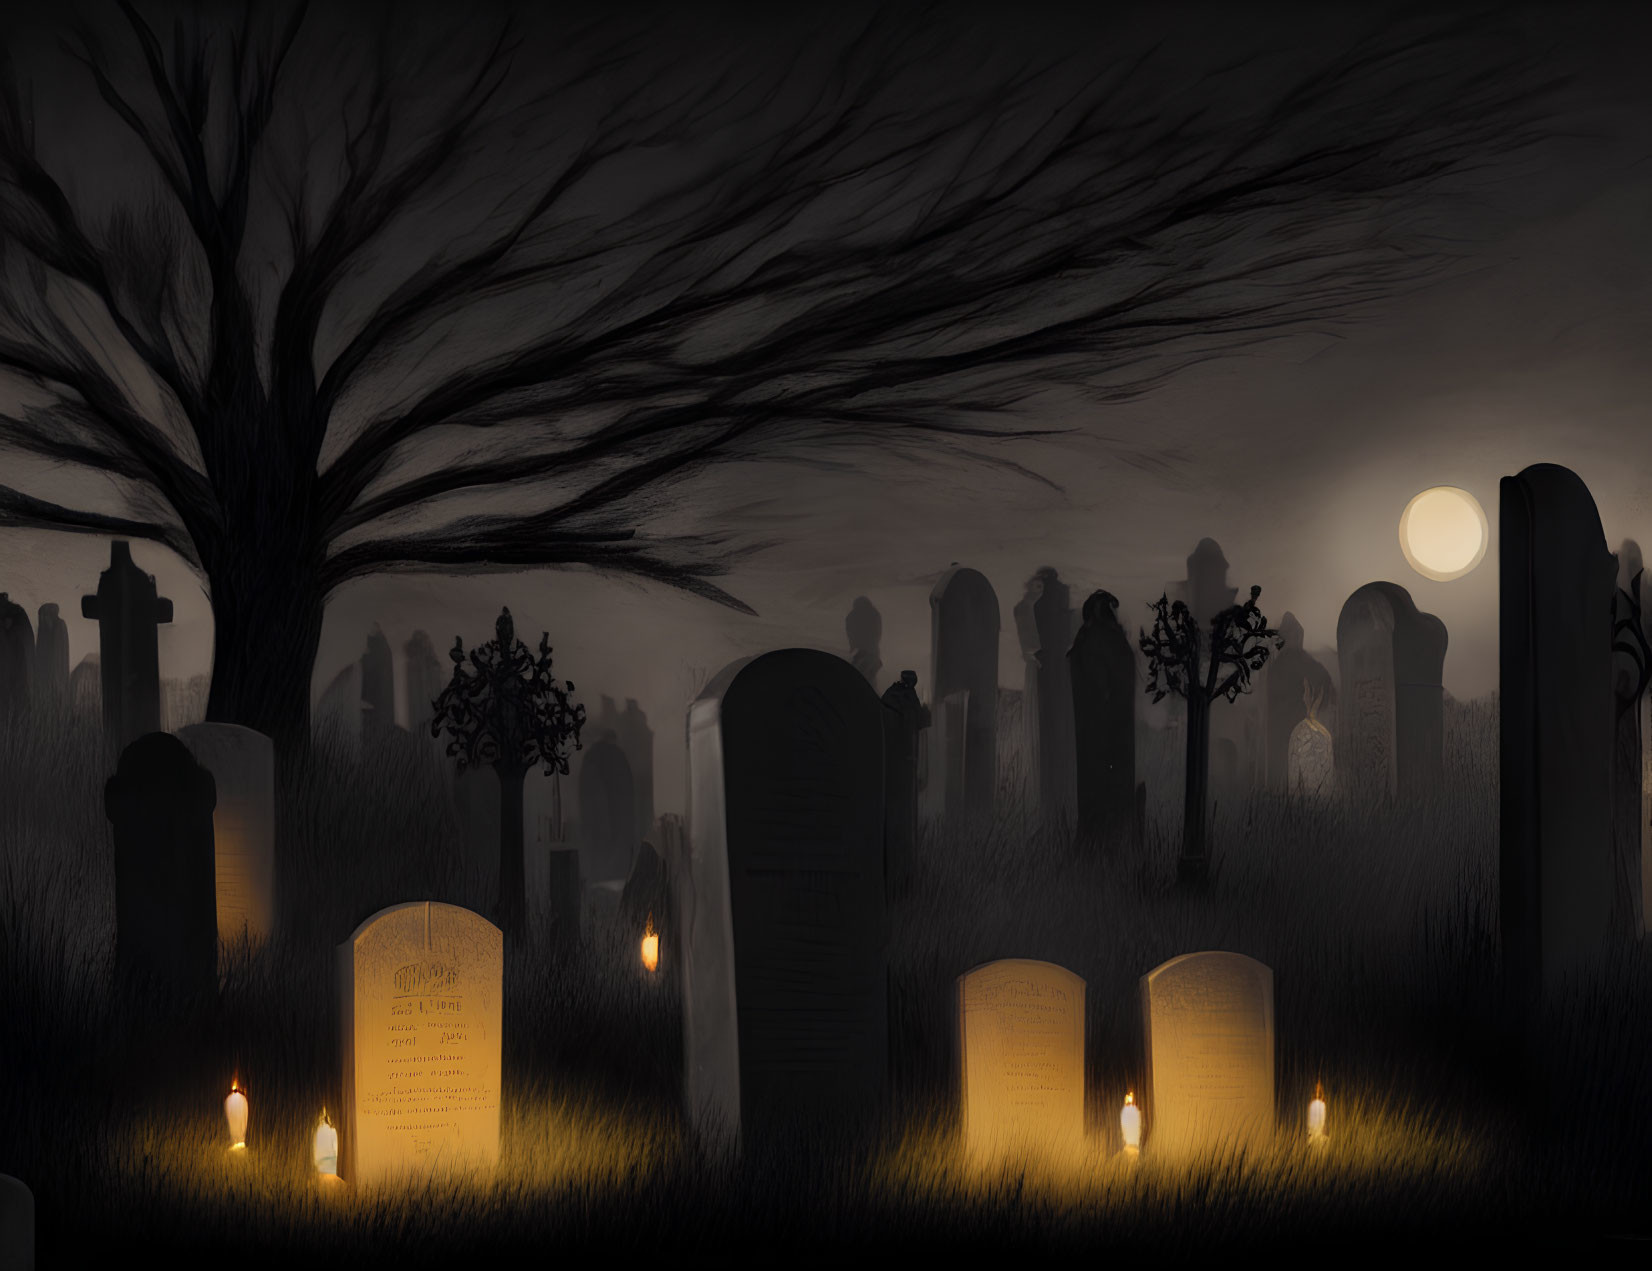 Eerie cemetery scene with tombstones, bare tree, and candles at night